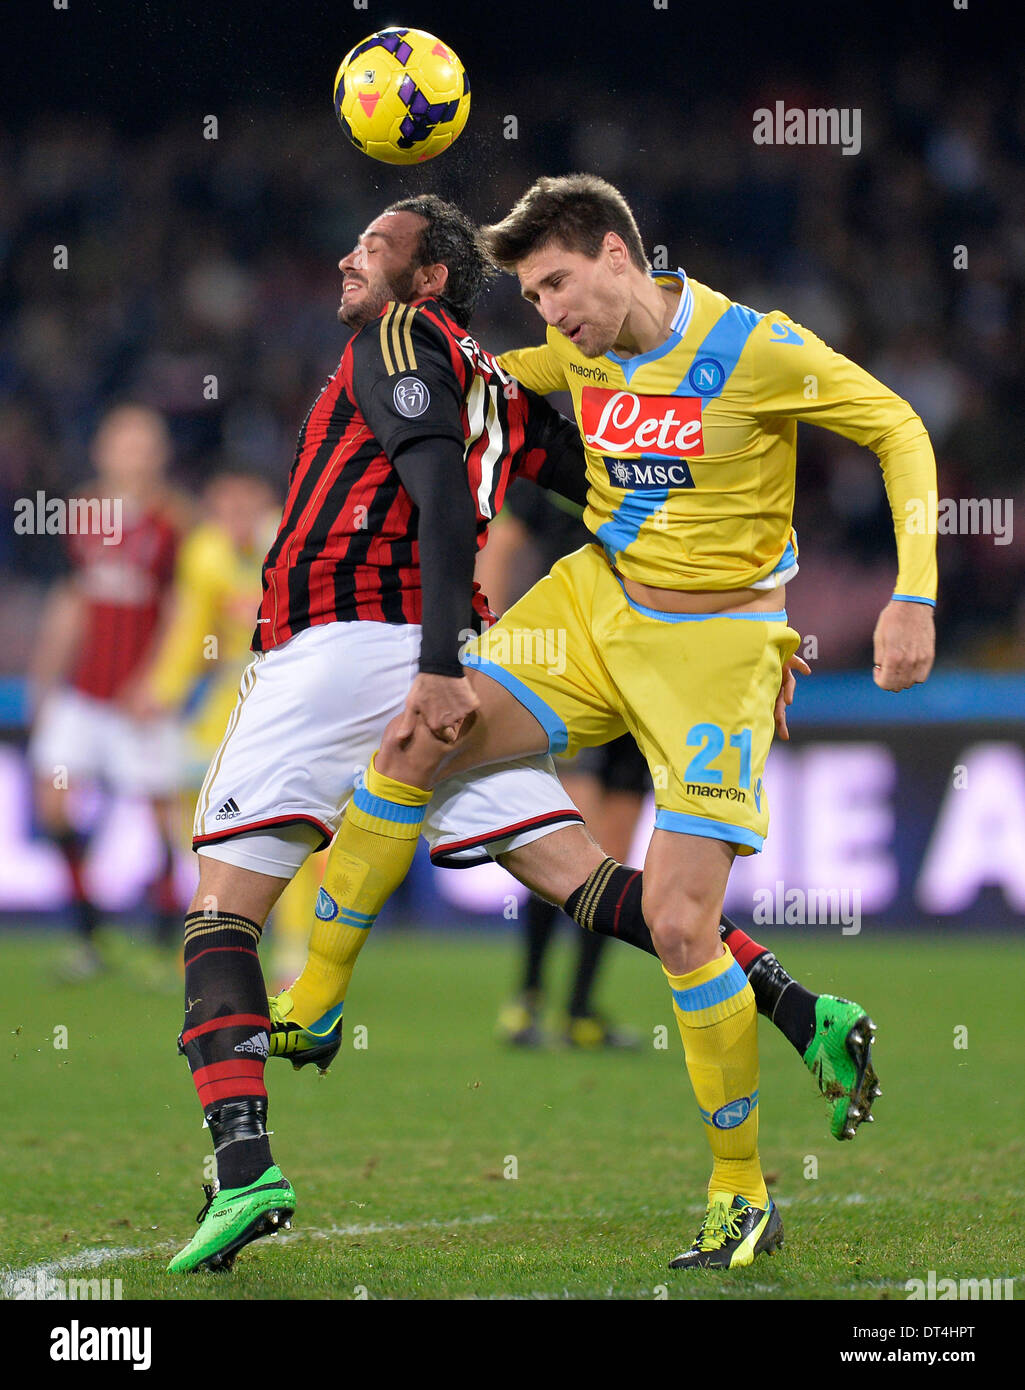 Naples, Italy. 8th Feb, 2014. AC Milan's Gianpaolo Pazzini (L) vies for the ball with Napoli's Federico Fernandez during their Italian Serie A soccer match at San Paolo stadium in Naples, Italy, Feb. 8, 2014. Napoli won 3:1. Credit:  Alberto Lingria/Xinhua/Alamy Live News Stock Photo